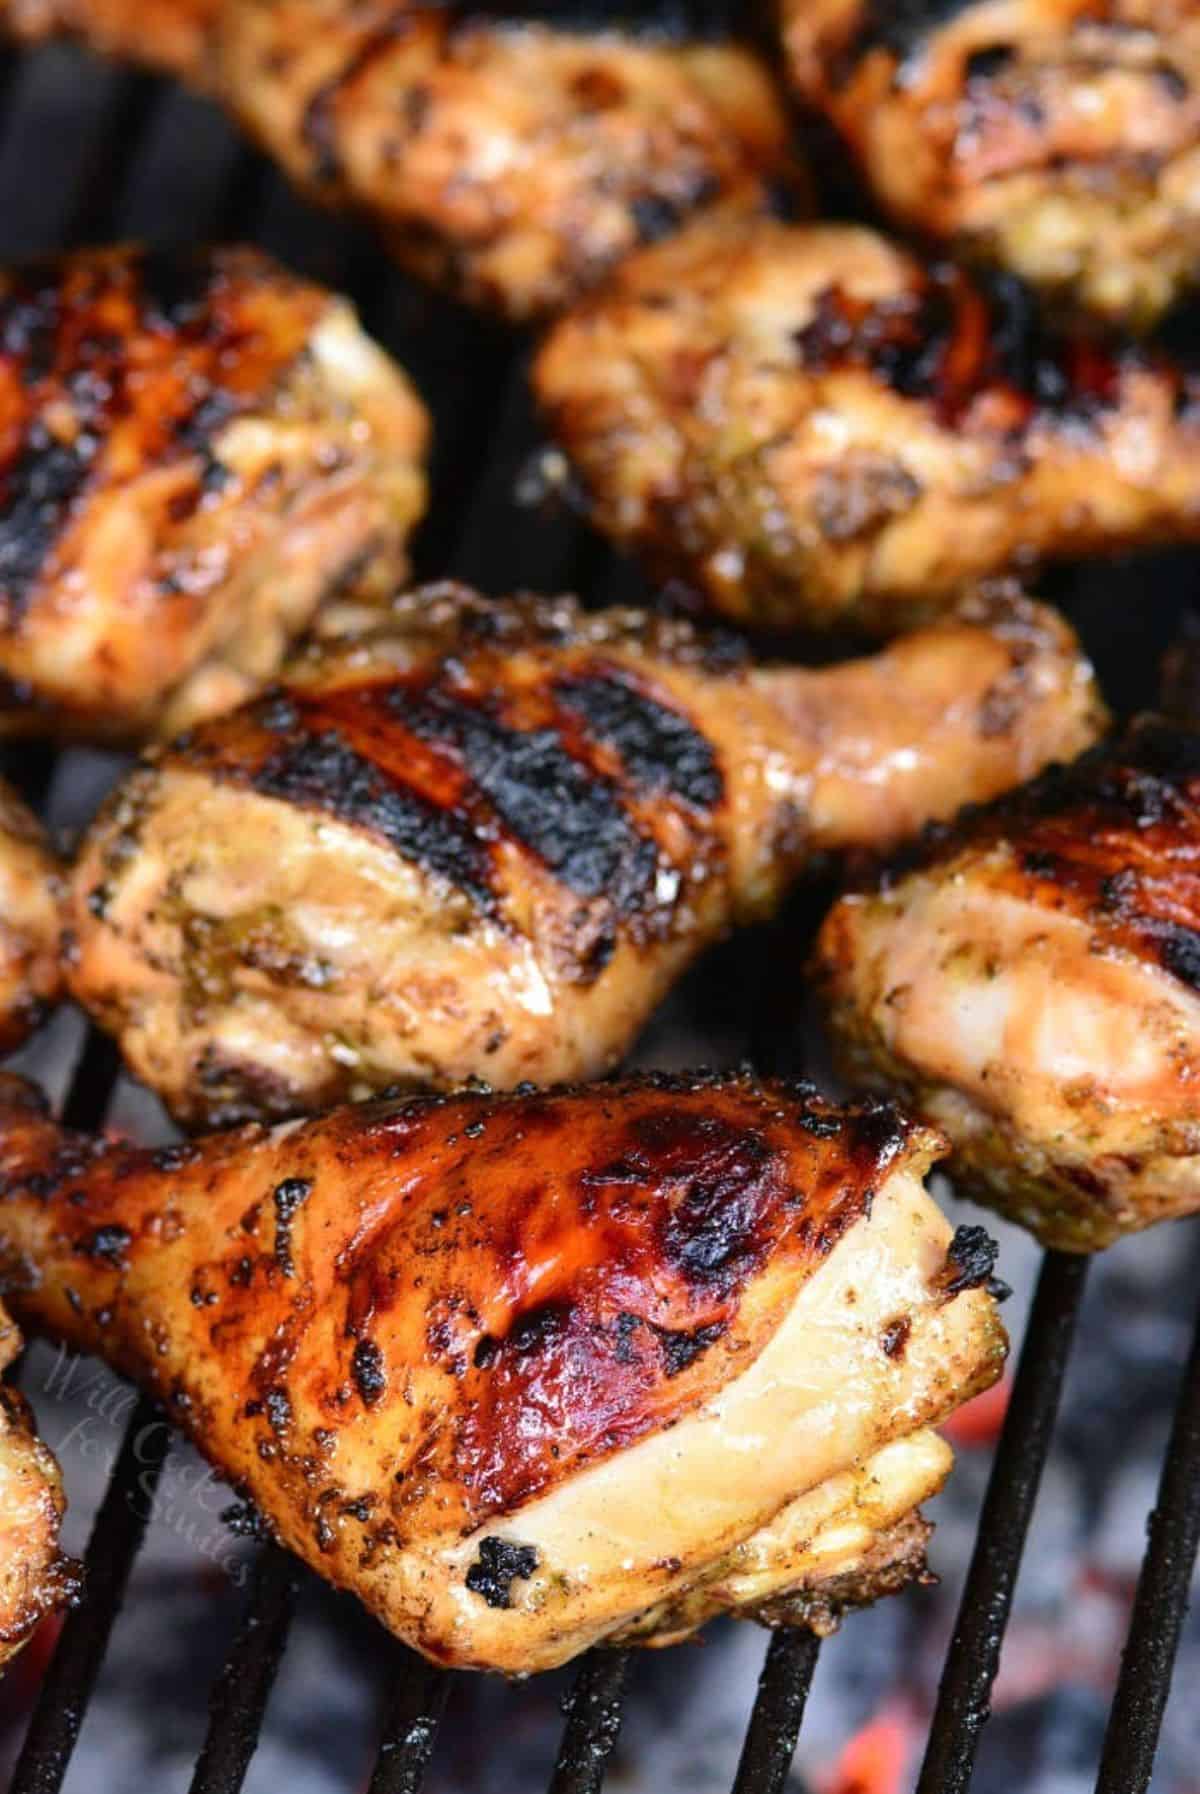 marinated chicken drumstick cooking on the grill.